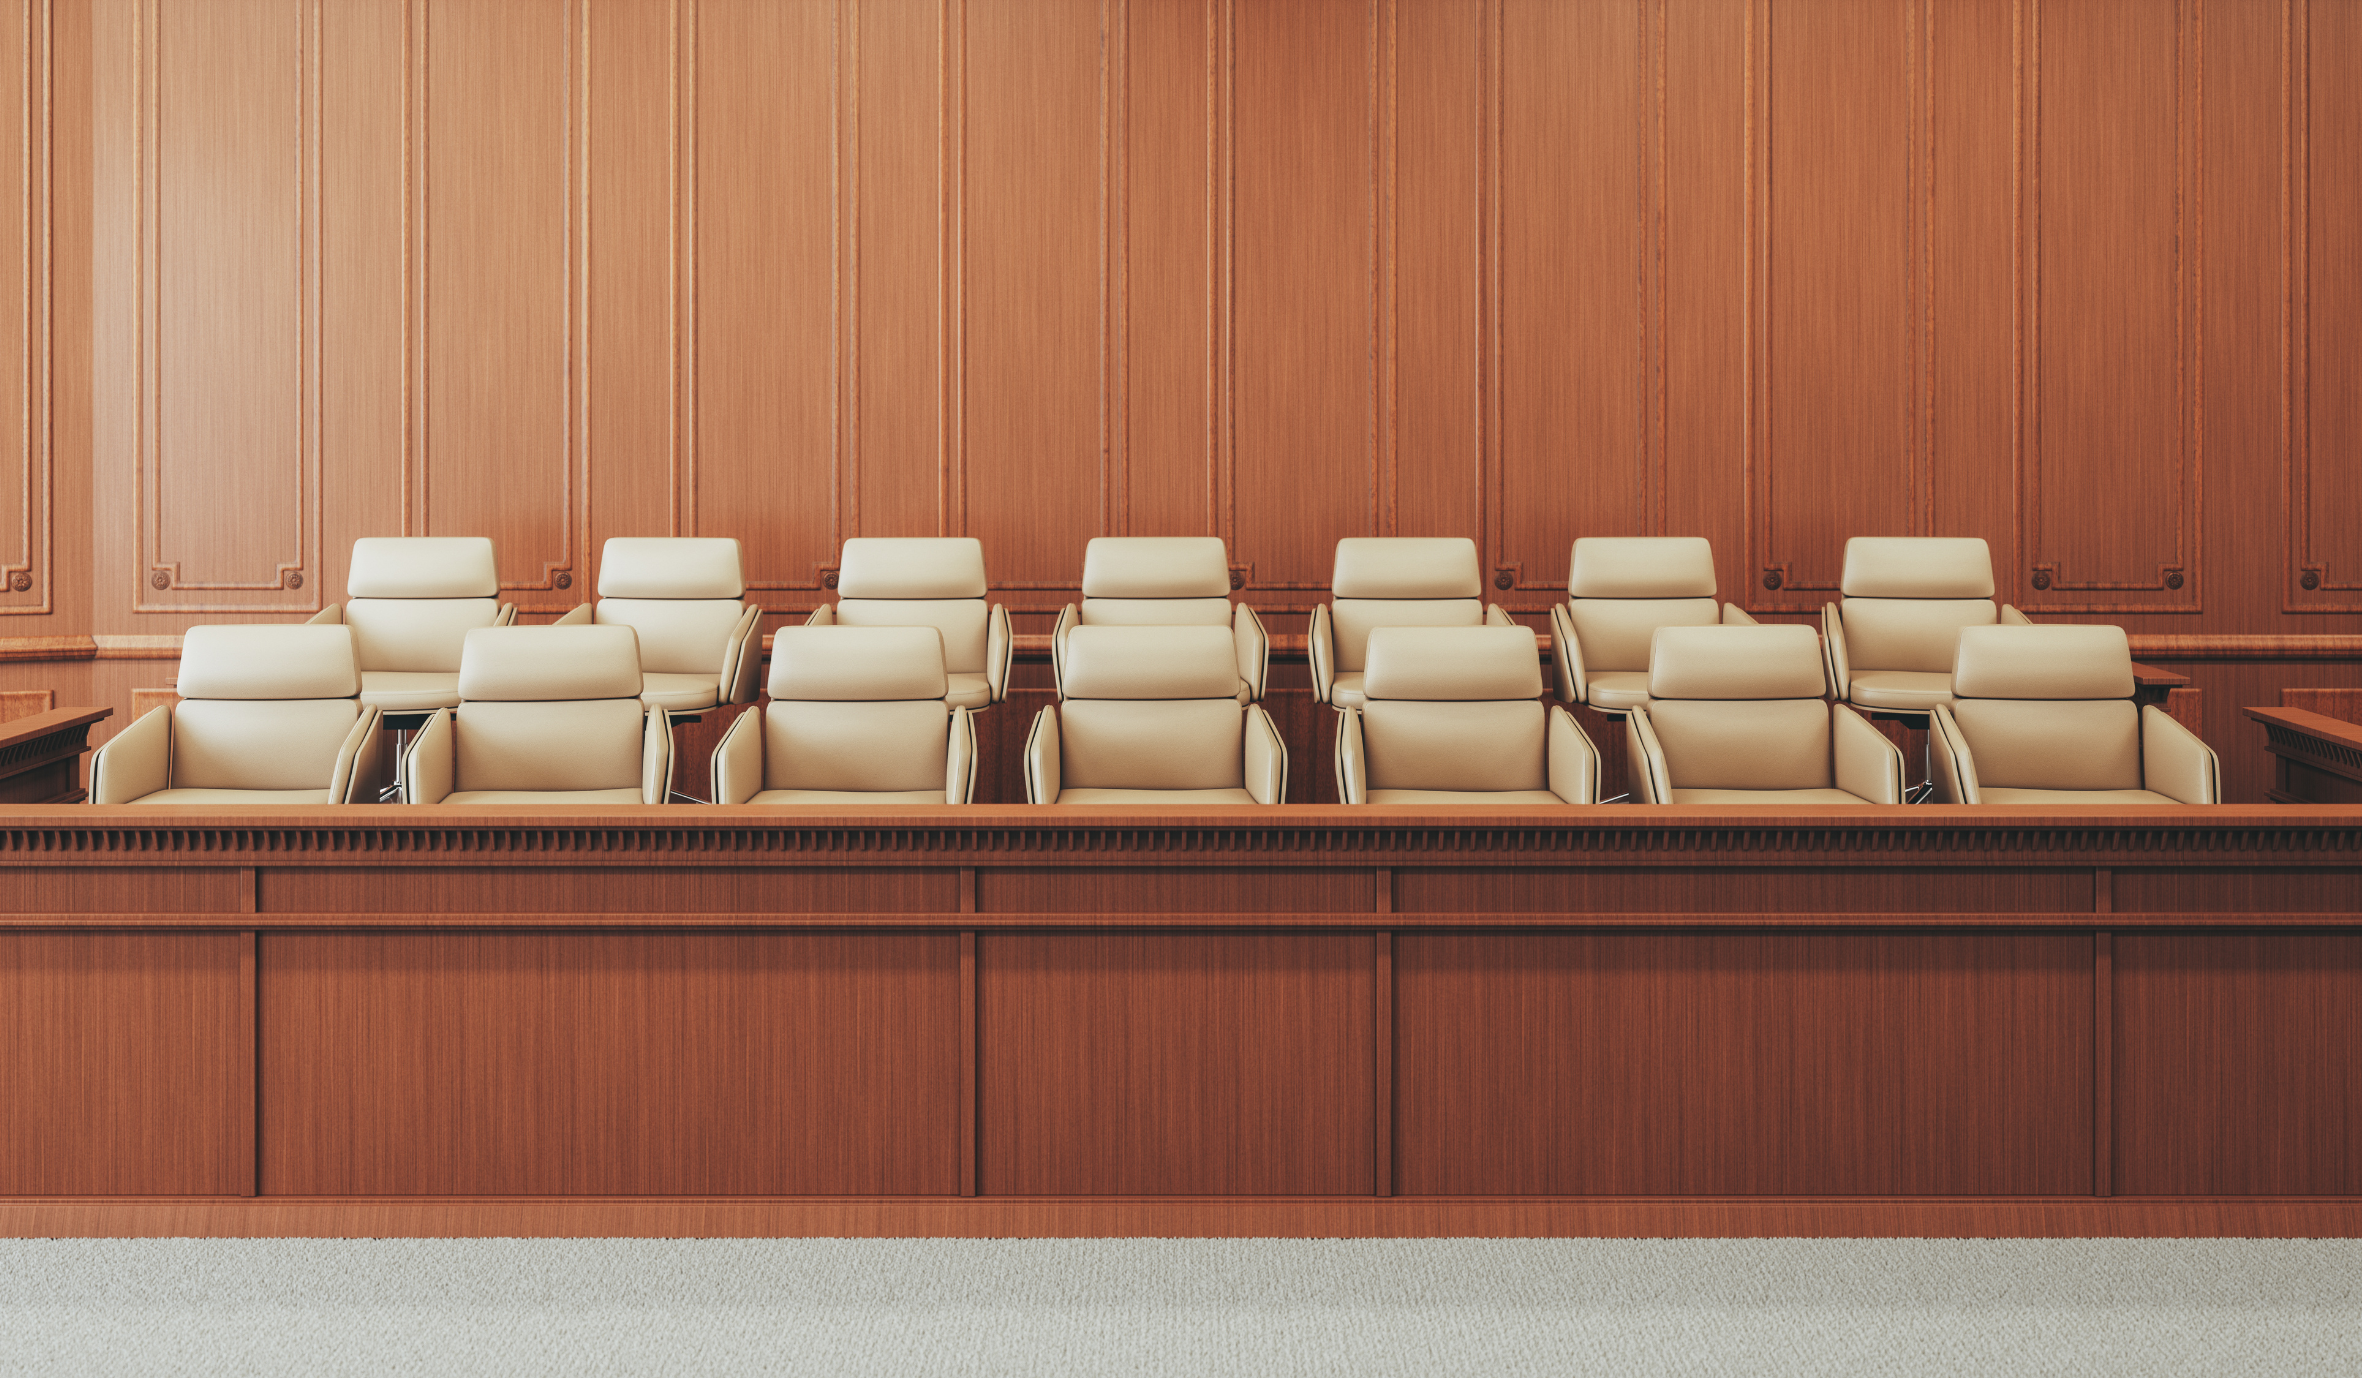 do employers pay for jury duty